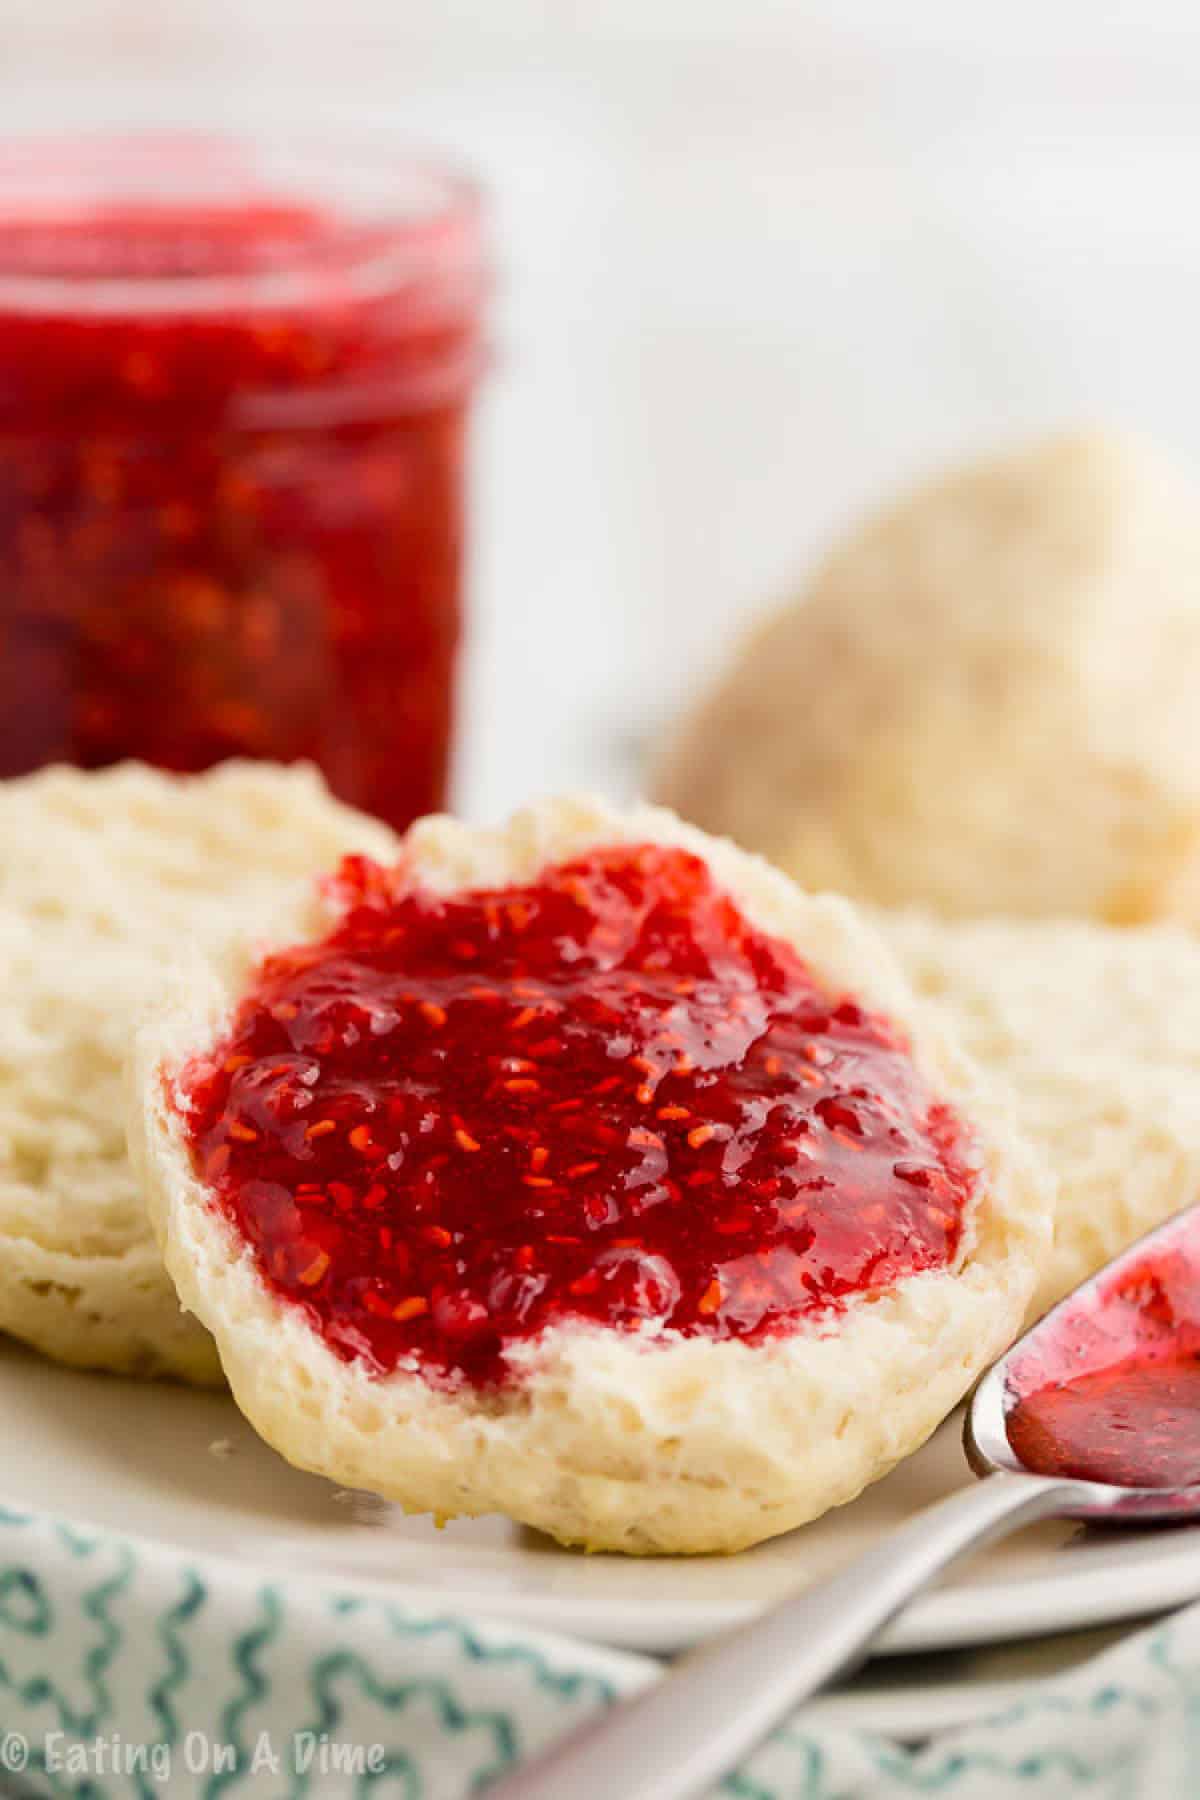 Raspberry jam spread on biscuits on a plate